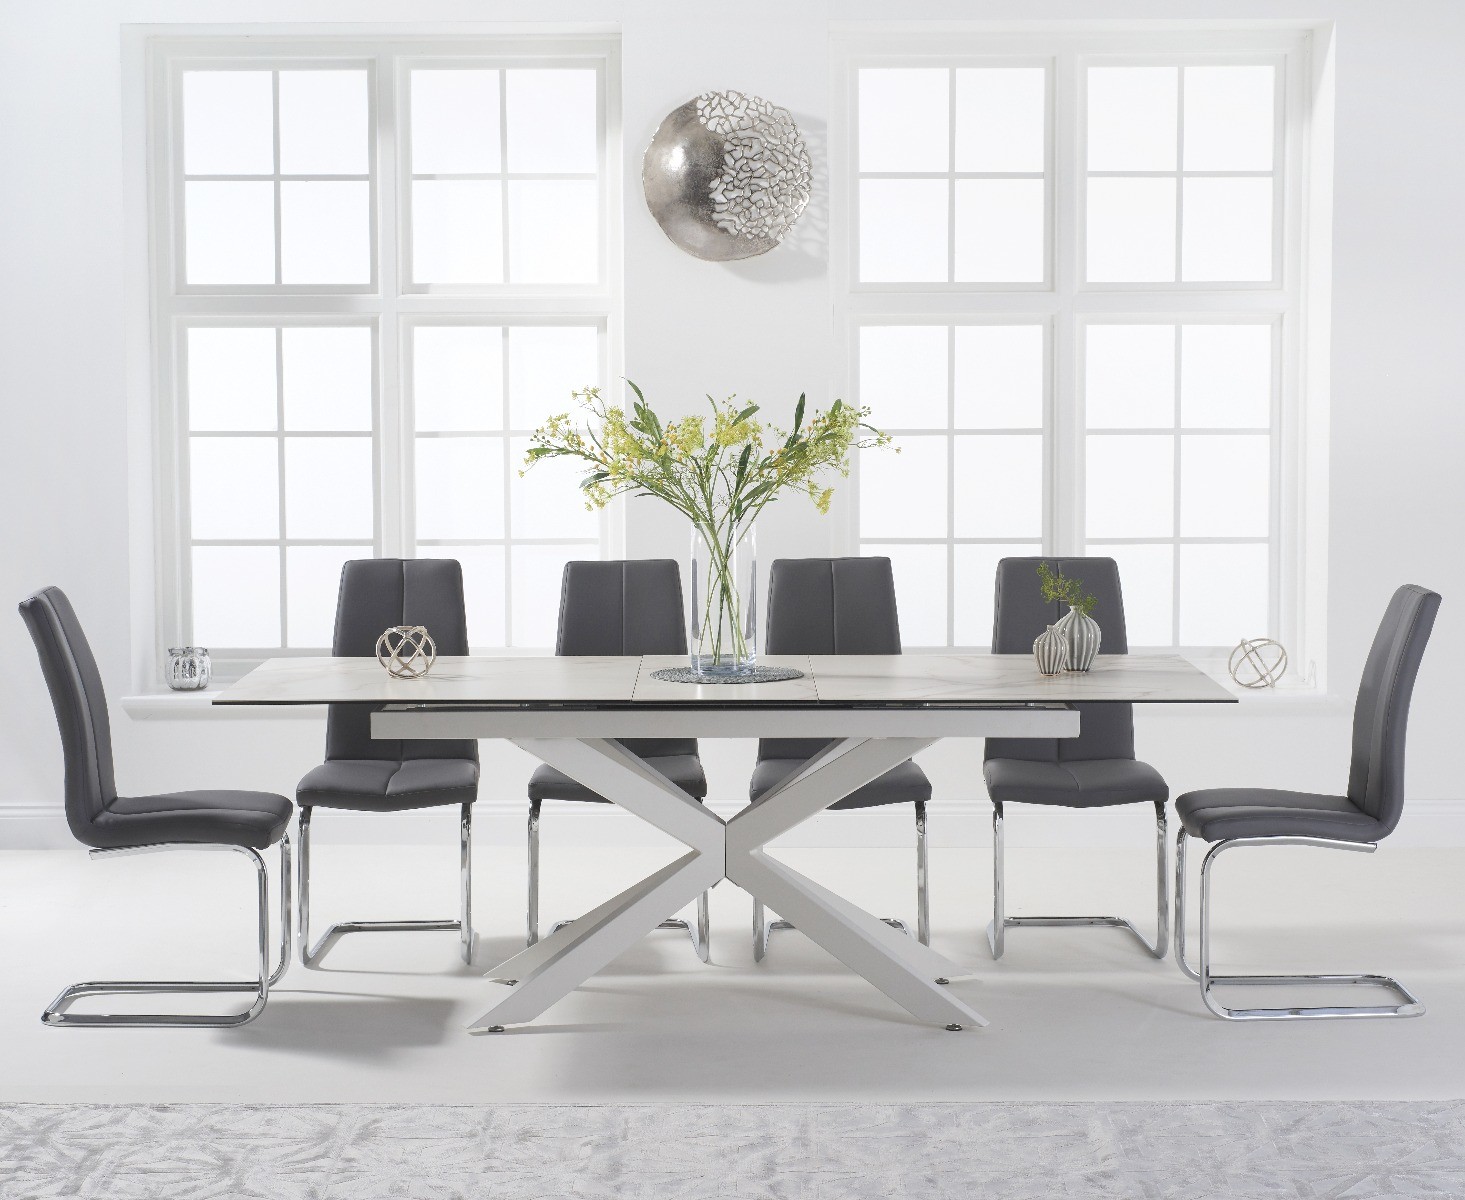 Boston 180cm White Leg Extending Ceramic Dining Table With 6 Grey Tarin Chairs